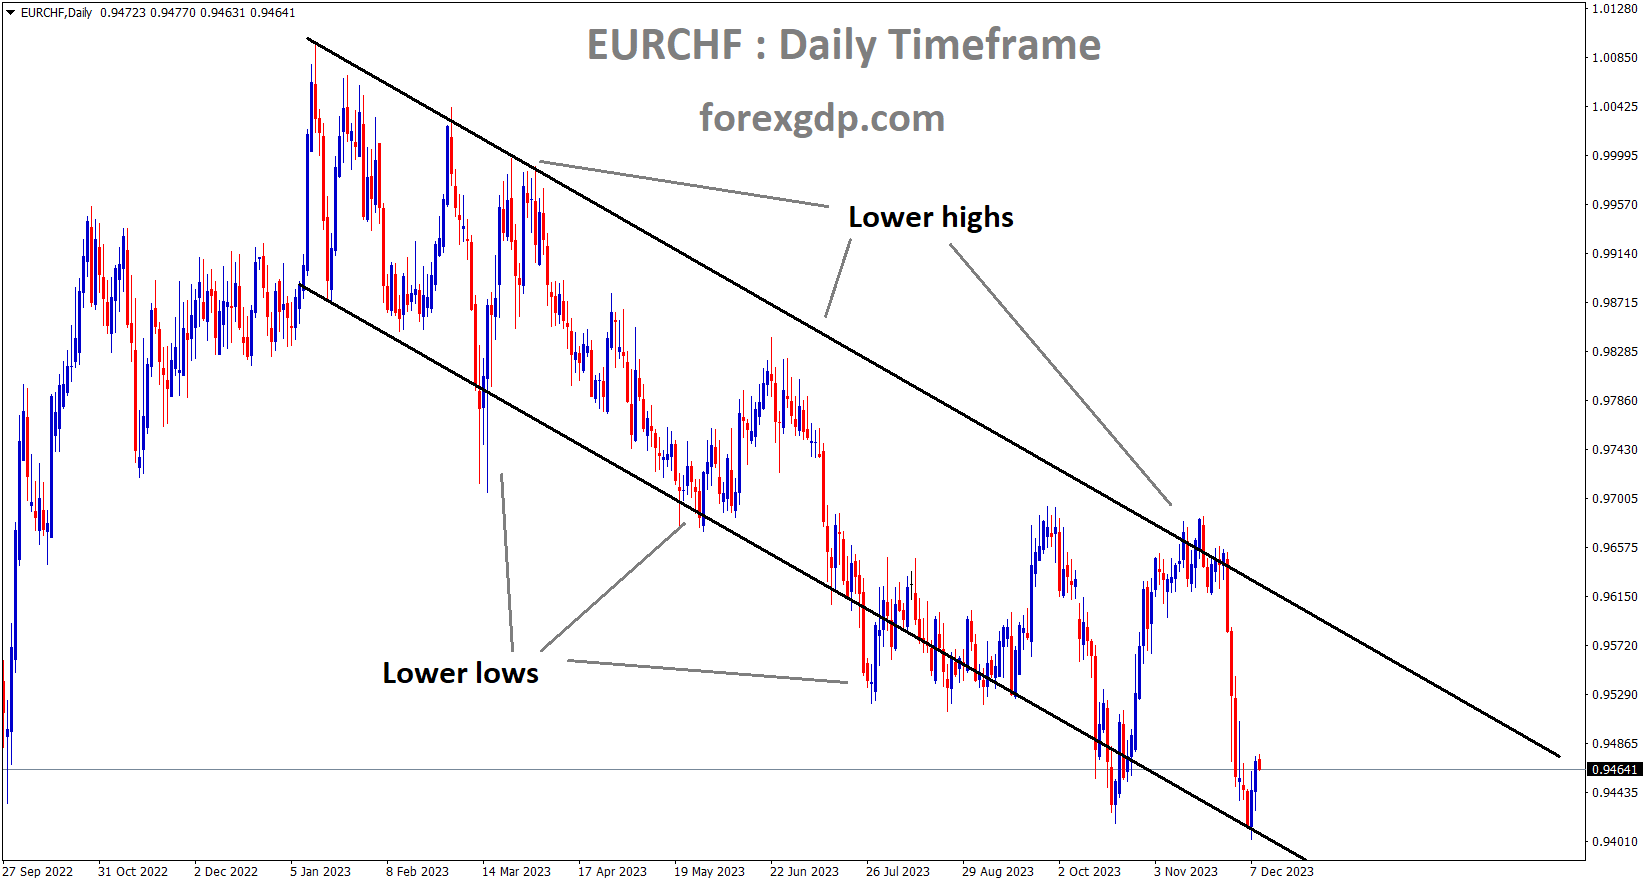 EURCHF is moving in descending channel and the market has rebounded from the lower low area of channel